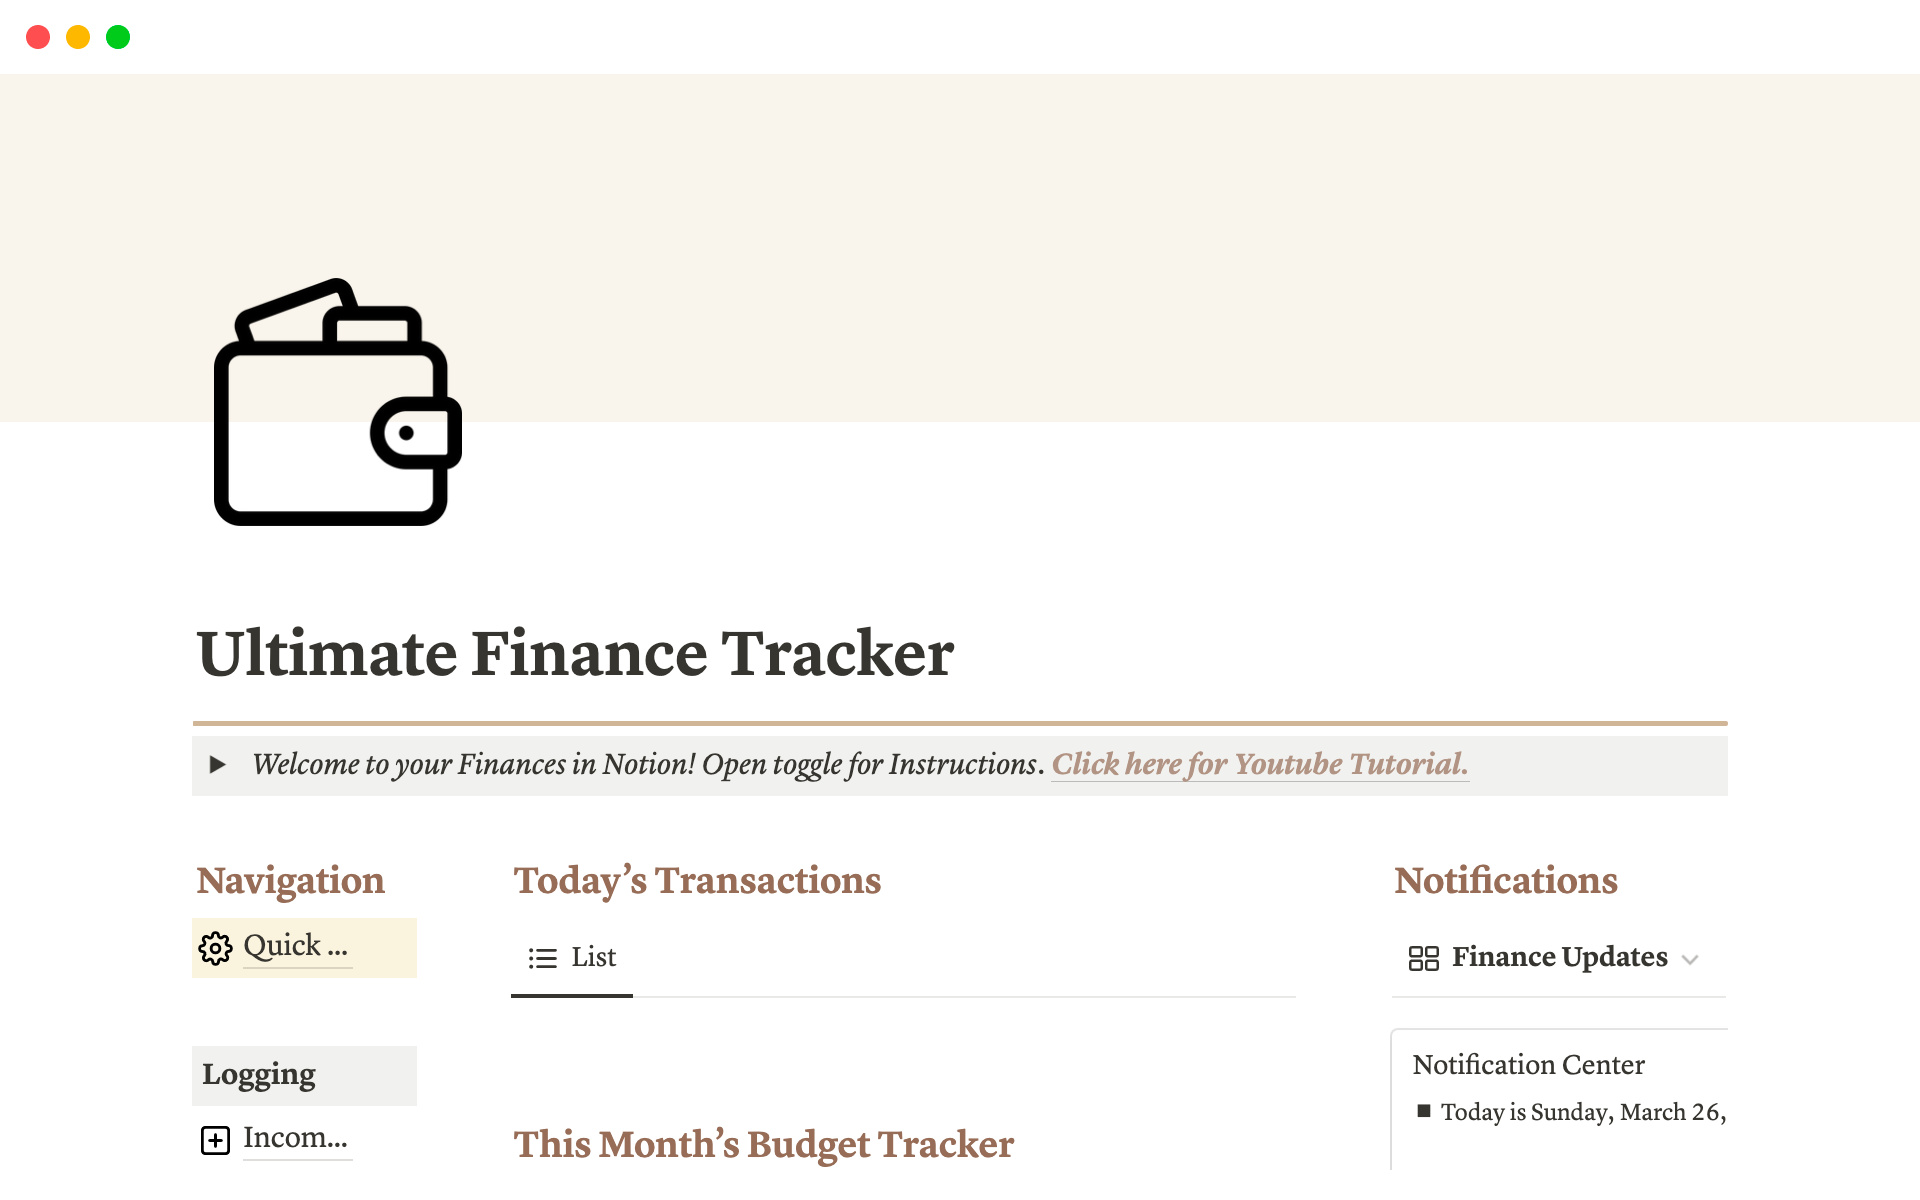 The complete template to manage your finances in Notion: Set monthly & annual budgets, track your income & expenses, link accounts to transactions, and transfer funds from one account to another.